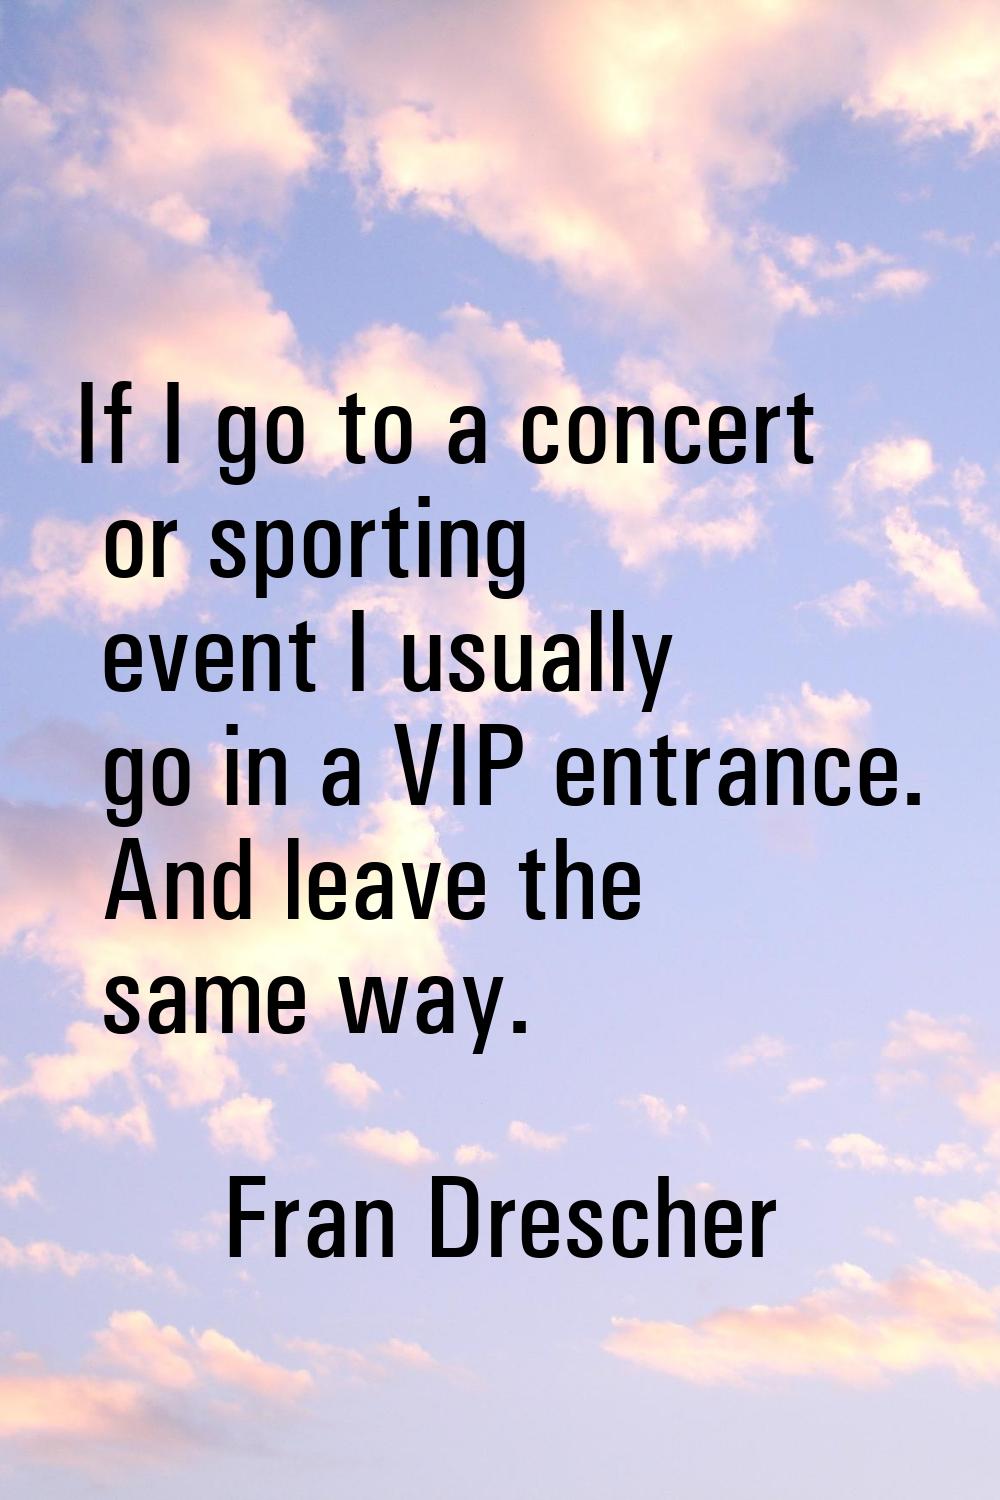 If I go to a concert or sporting event I usually go in a VIP entrance. And leave the same way.